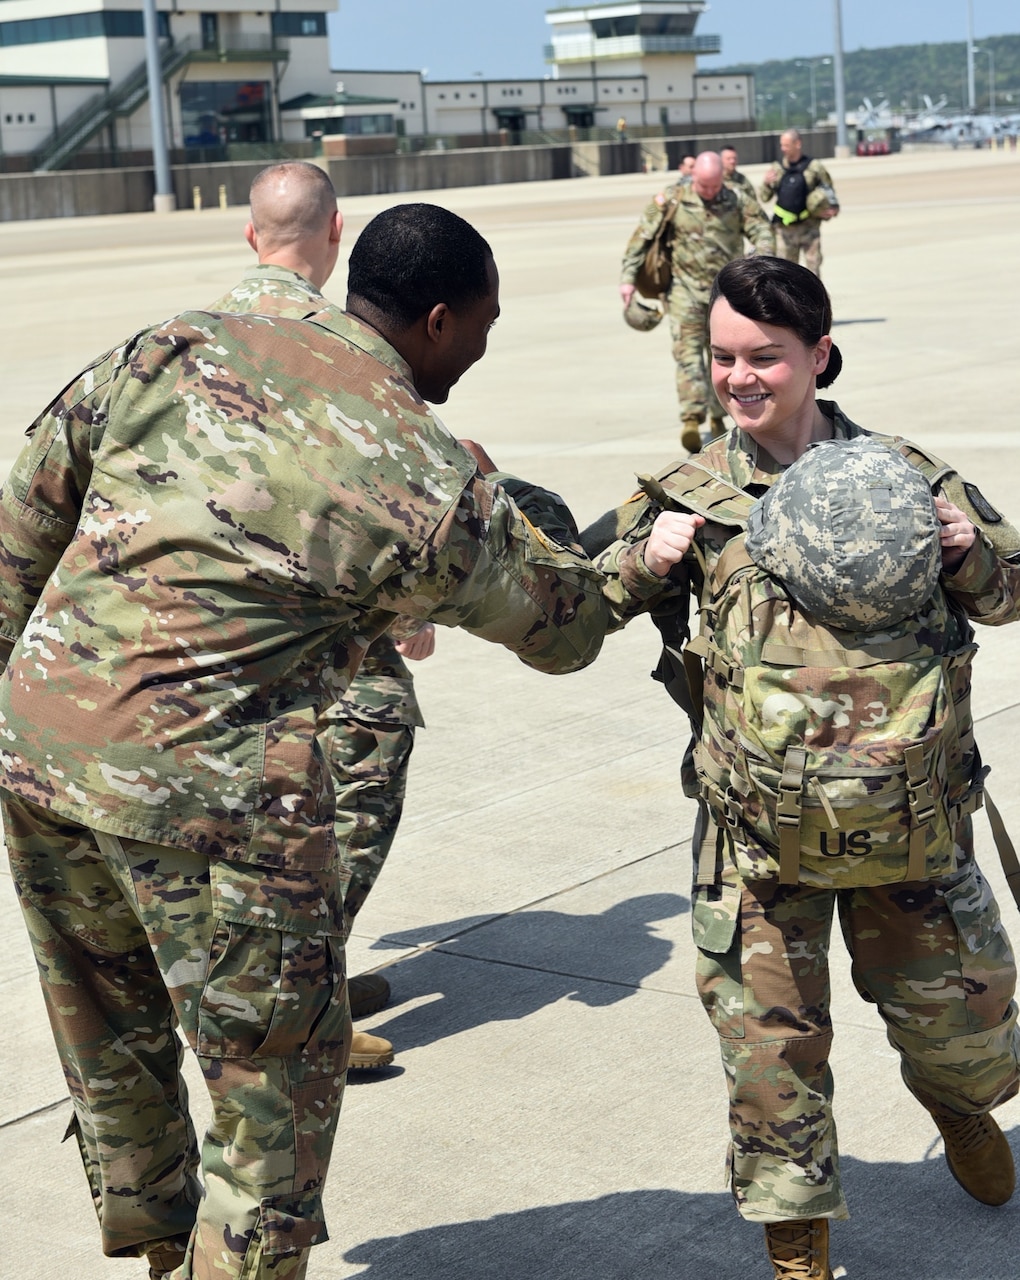 A supervising soldier elbow-bumps a female soldier carrying a heavy pack across tarmac.